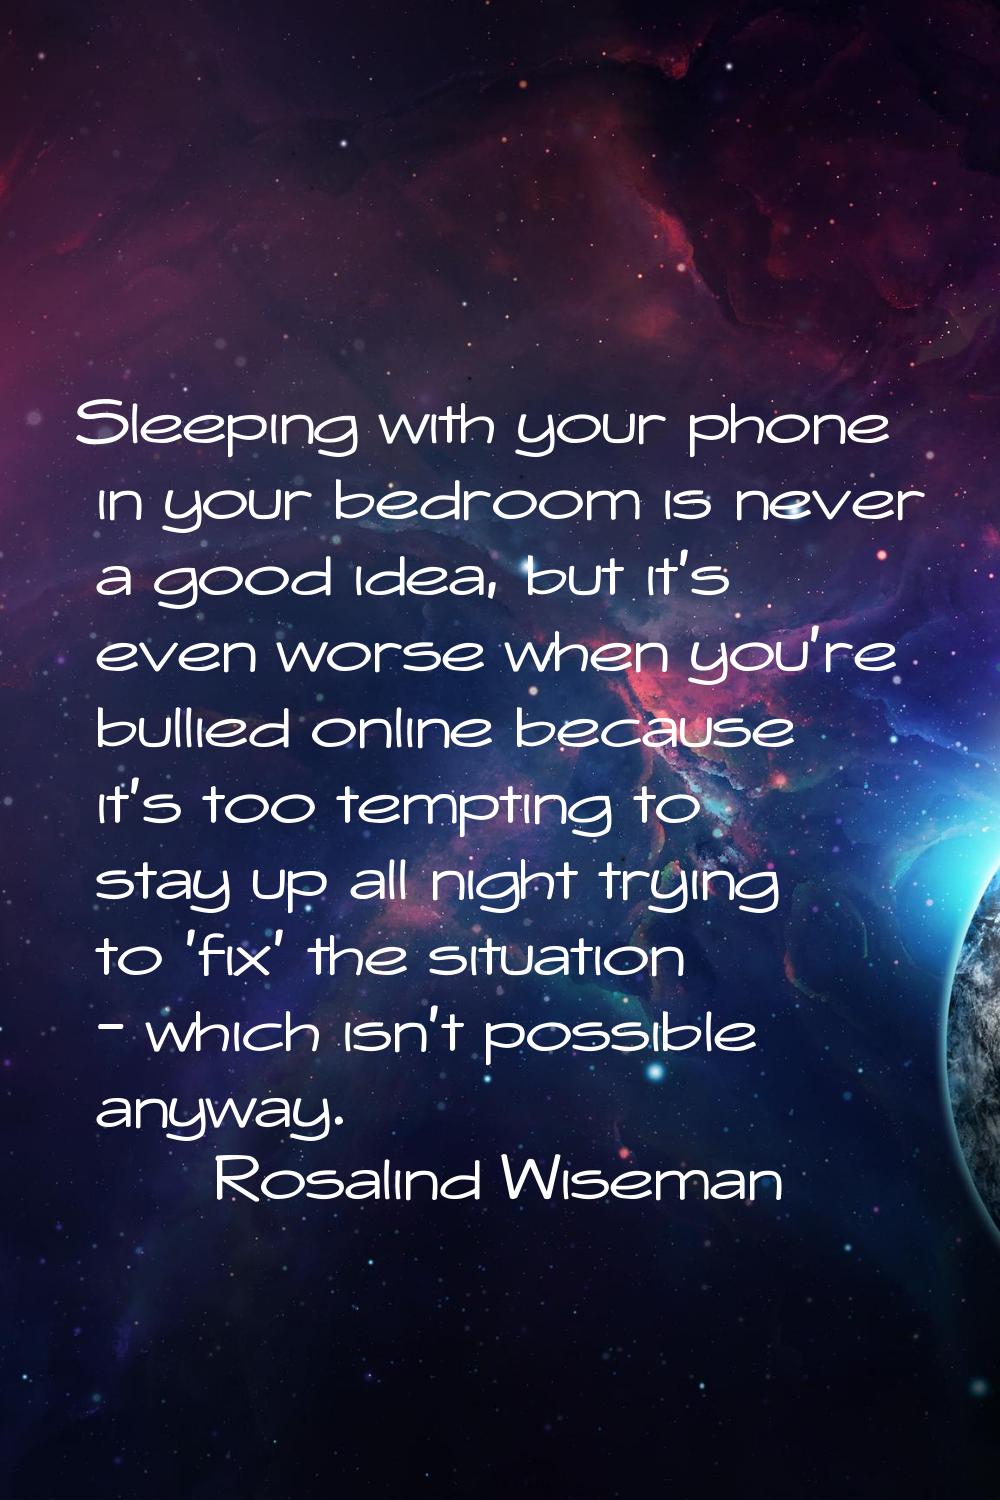 Sleeping with your phone in your bedroom is never a good idea, but it's even worse when you're bull